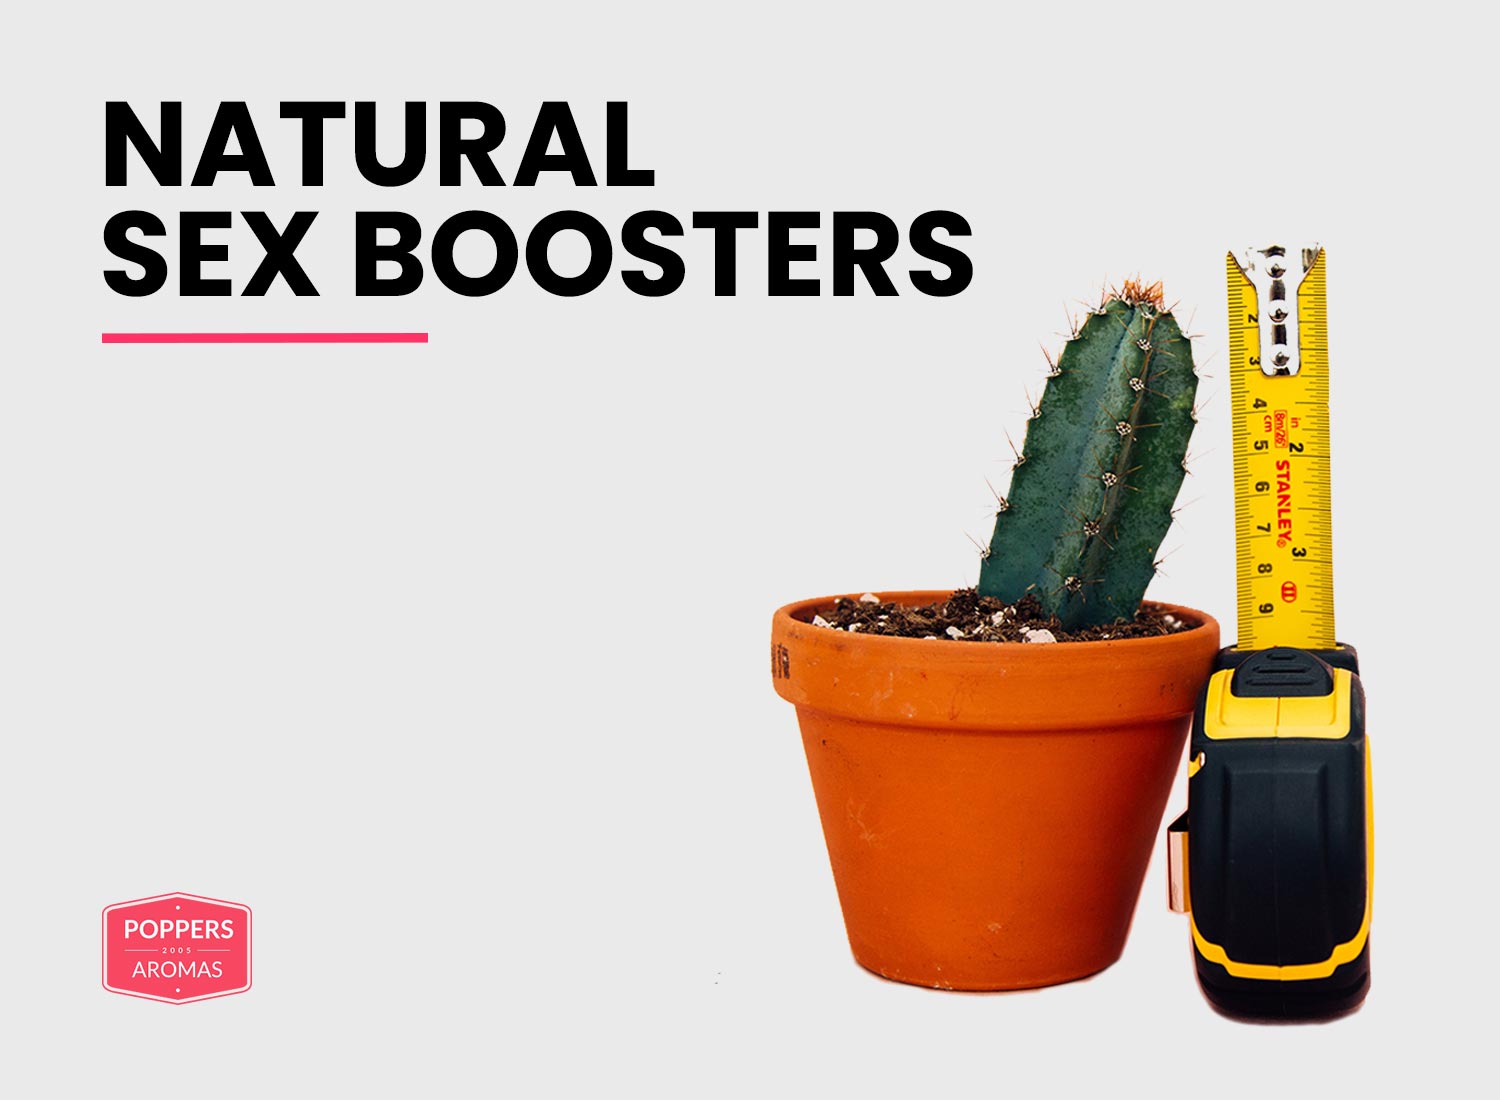 Natural sex boosters